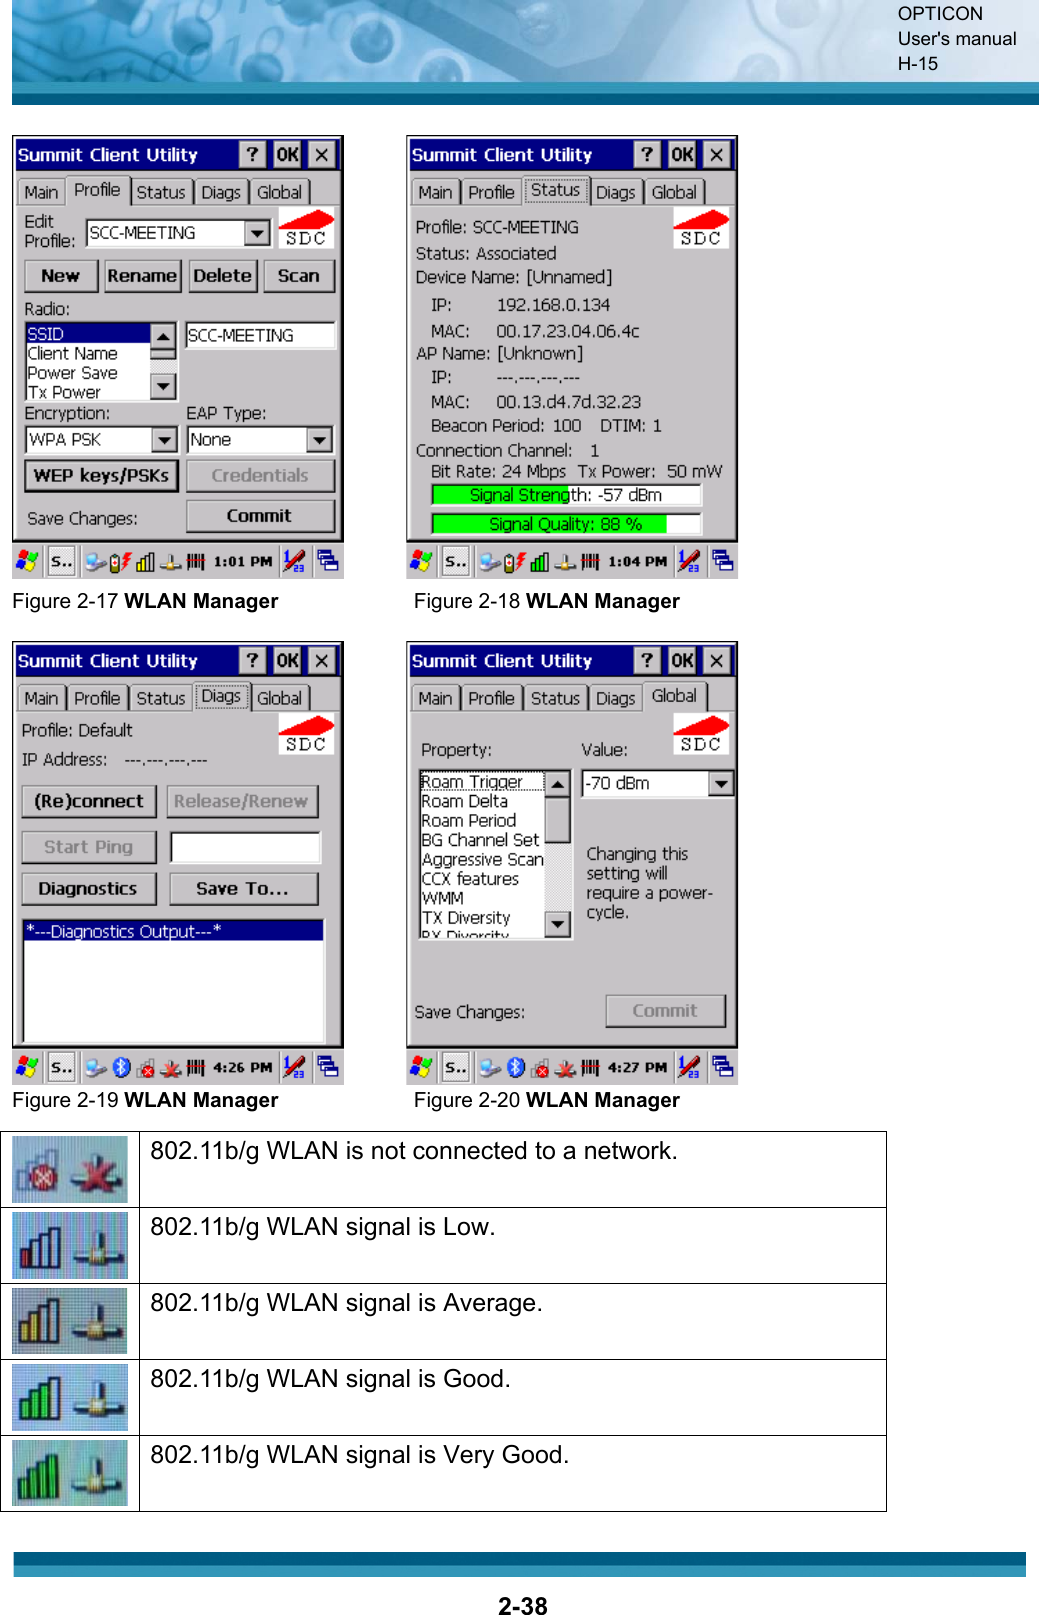 OPTICON User&apos;s manual H-152-38Figure 2-17 WLAN Manager             Figure 2-18 WLAN ManagerFigure 2-19 WLAN Manager             Figure 2-20 WLAN Manager802.11b/g WLAN is not connected to a network. 802.11b/g WLAN signal is Low. 802.11b/g WLAN signal is Average. 802.11b/g WLAN signal is Good. 802.11b/g WLAN signal is Very Good. 